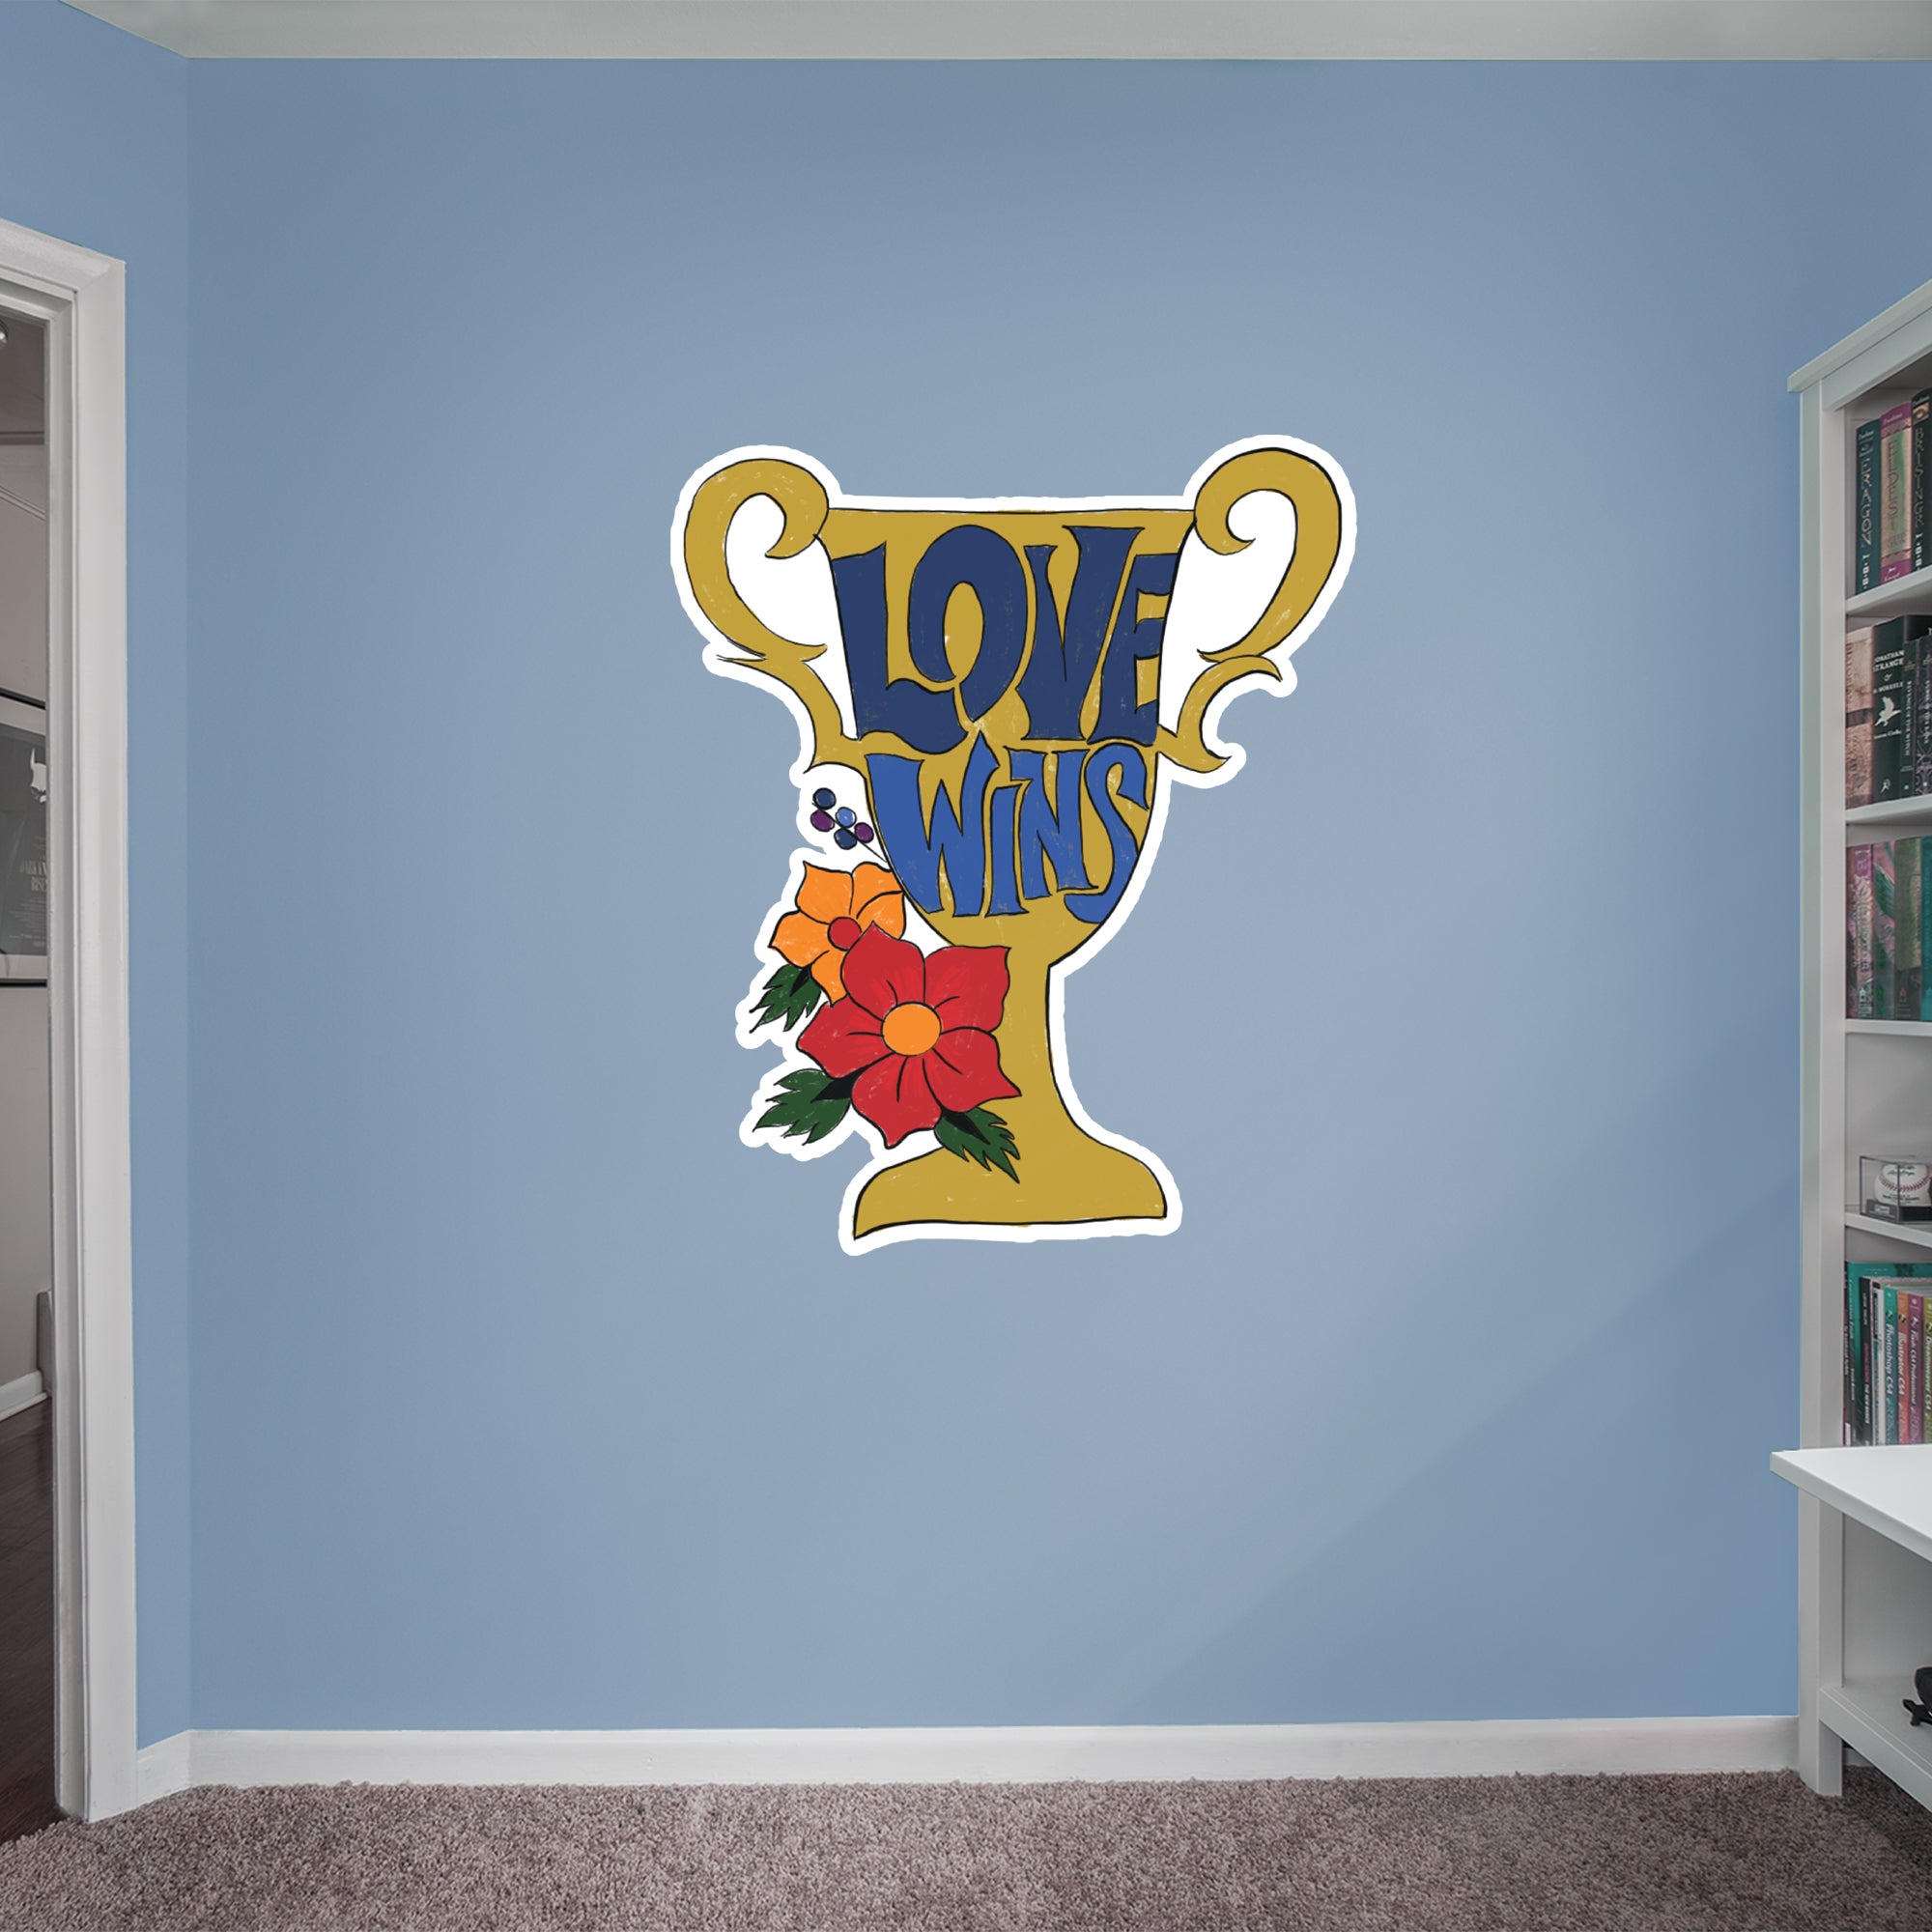 Love Wins - Officially Licensed Big Moods Removable Wall Decal Giant Decal (37"W x 44"H) by Fathead | Vinyl